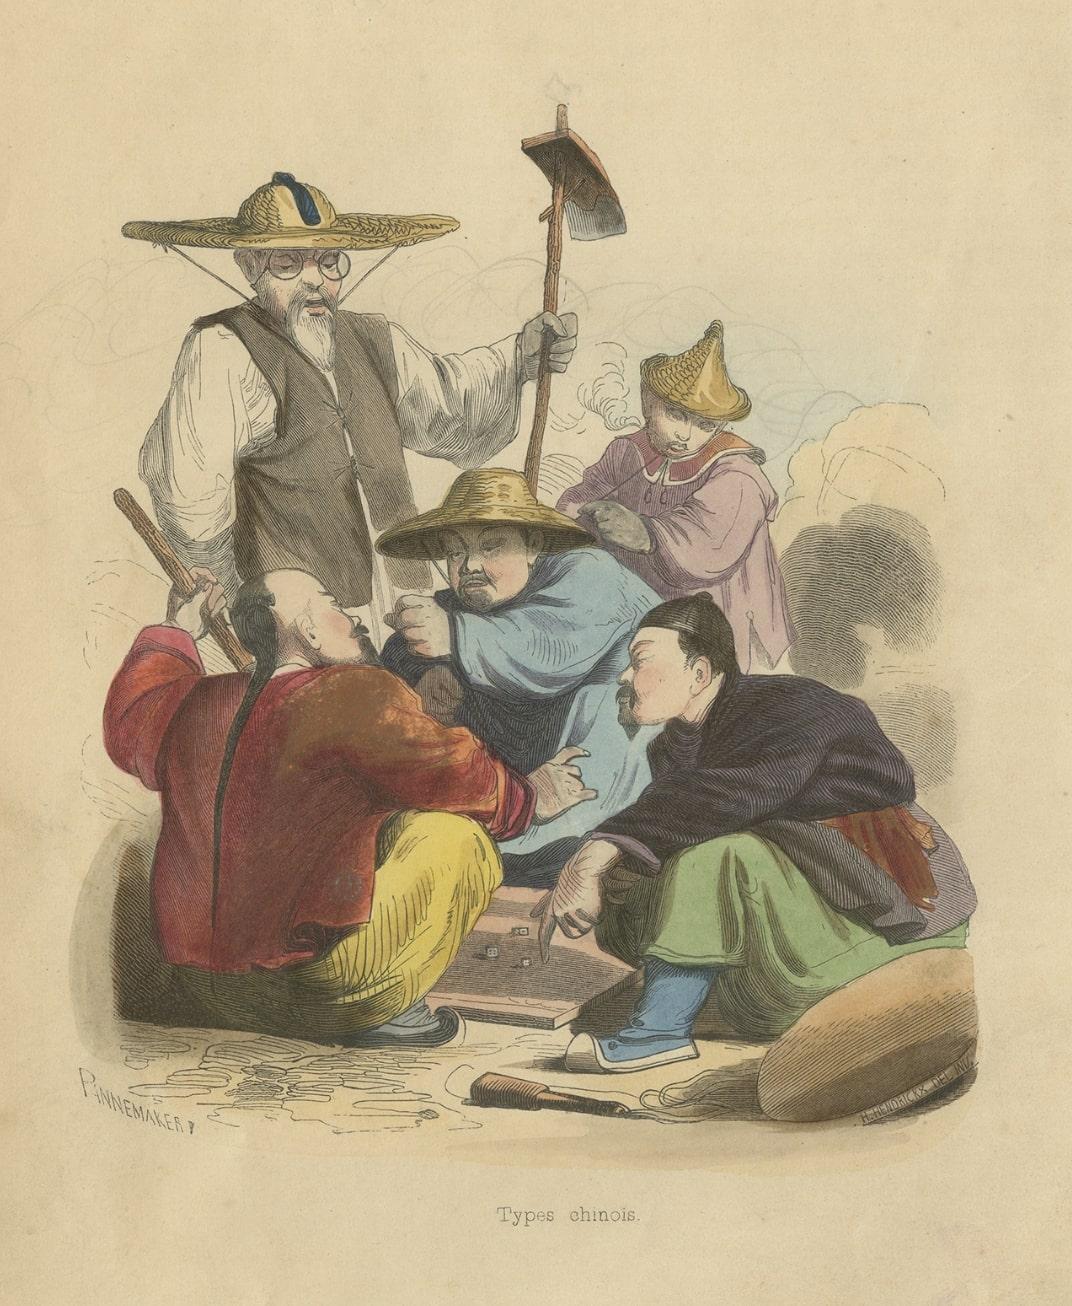 Antique Gambling Print of Chinese Men Playing a Game of Dice, 1843